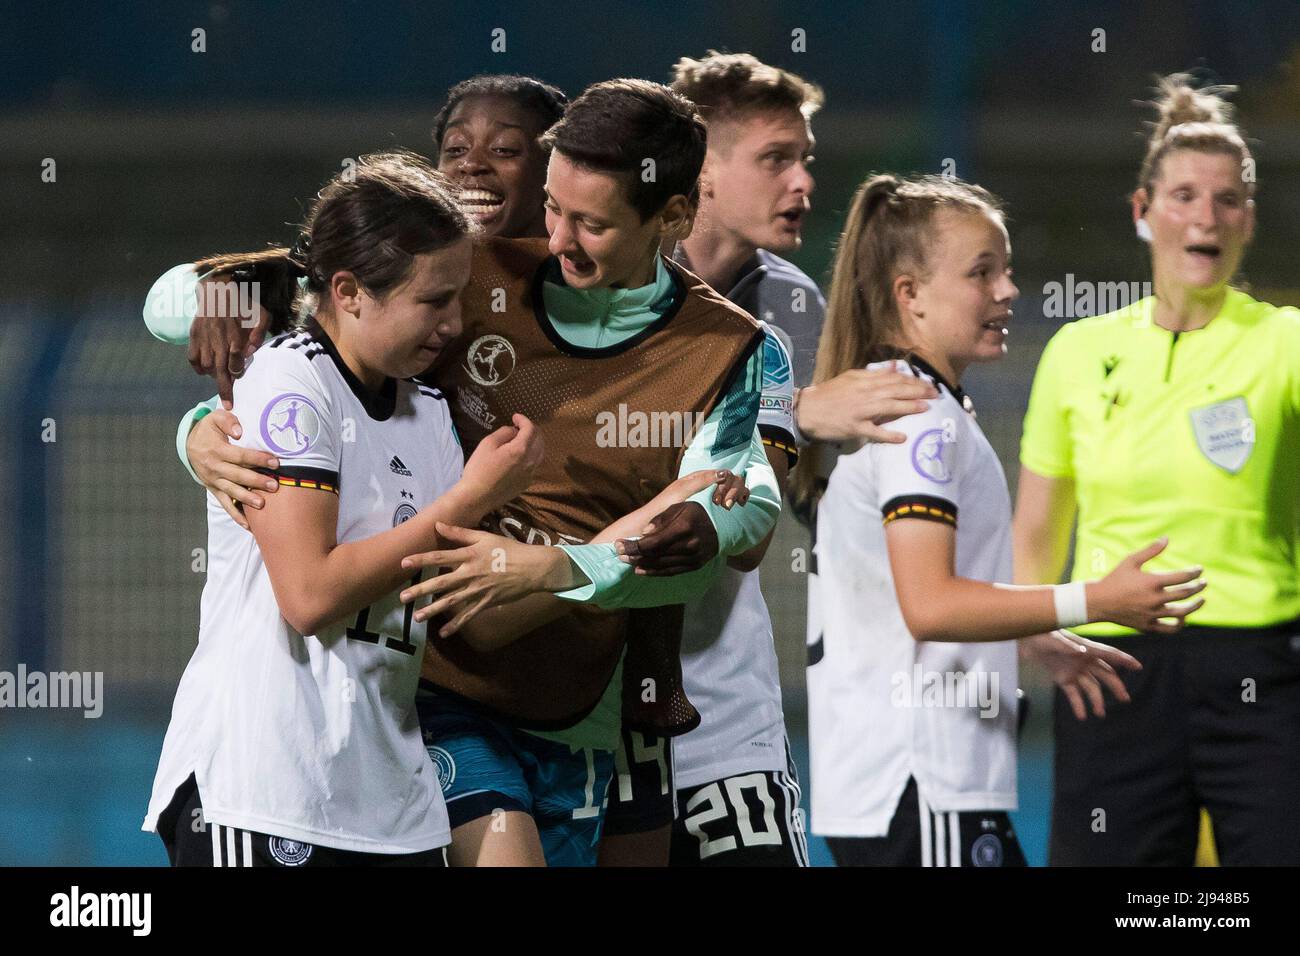 Zenica, Bosnia and Herzegovina, 15th May 2022. Loreen Bender of Germany reacts during the UEFA Women's Under-17 Championship 2022 Final match between Spain U17 and germany U17 at Grbavica Stadium in Sarajevo, Bosnia and Herzegovina. May 15, 2022. Credit: Nikola Krstic/Alamy Stock Photo